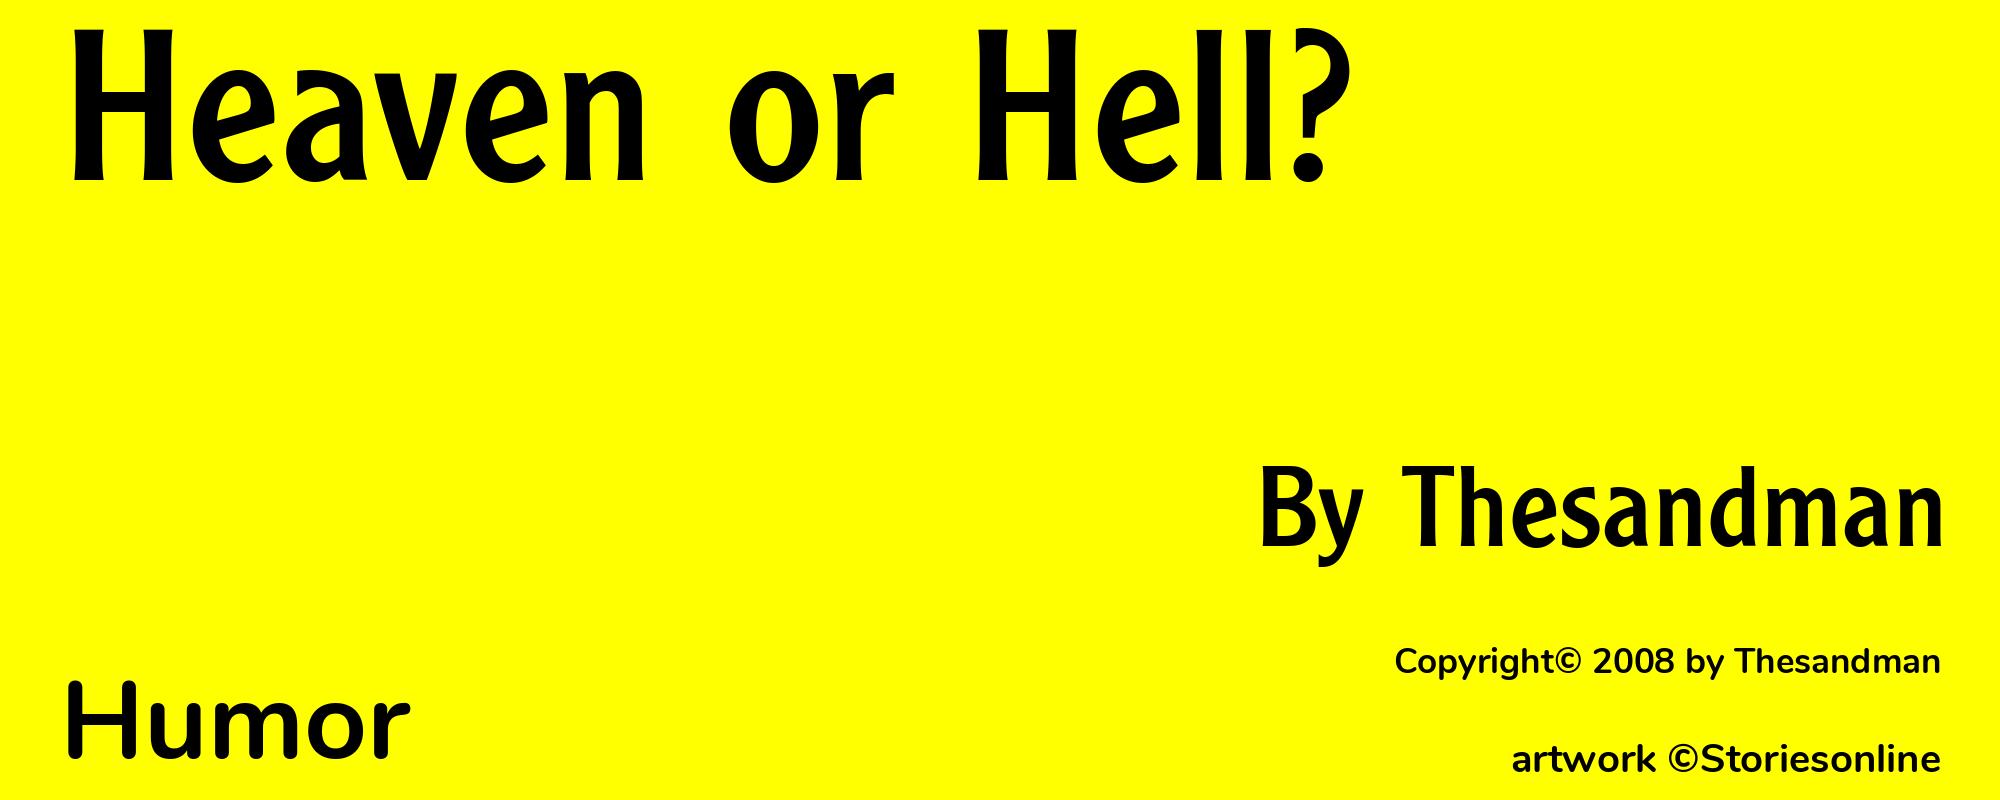 Heaven or Hell? - Cover